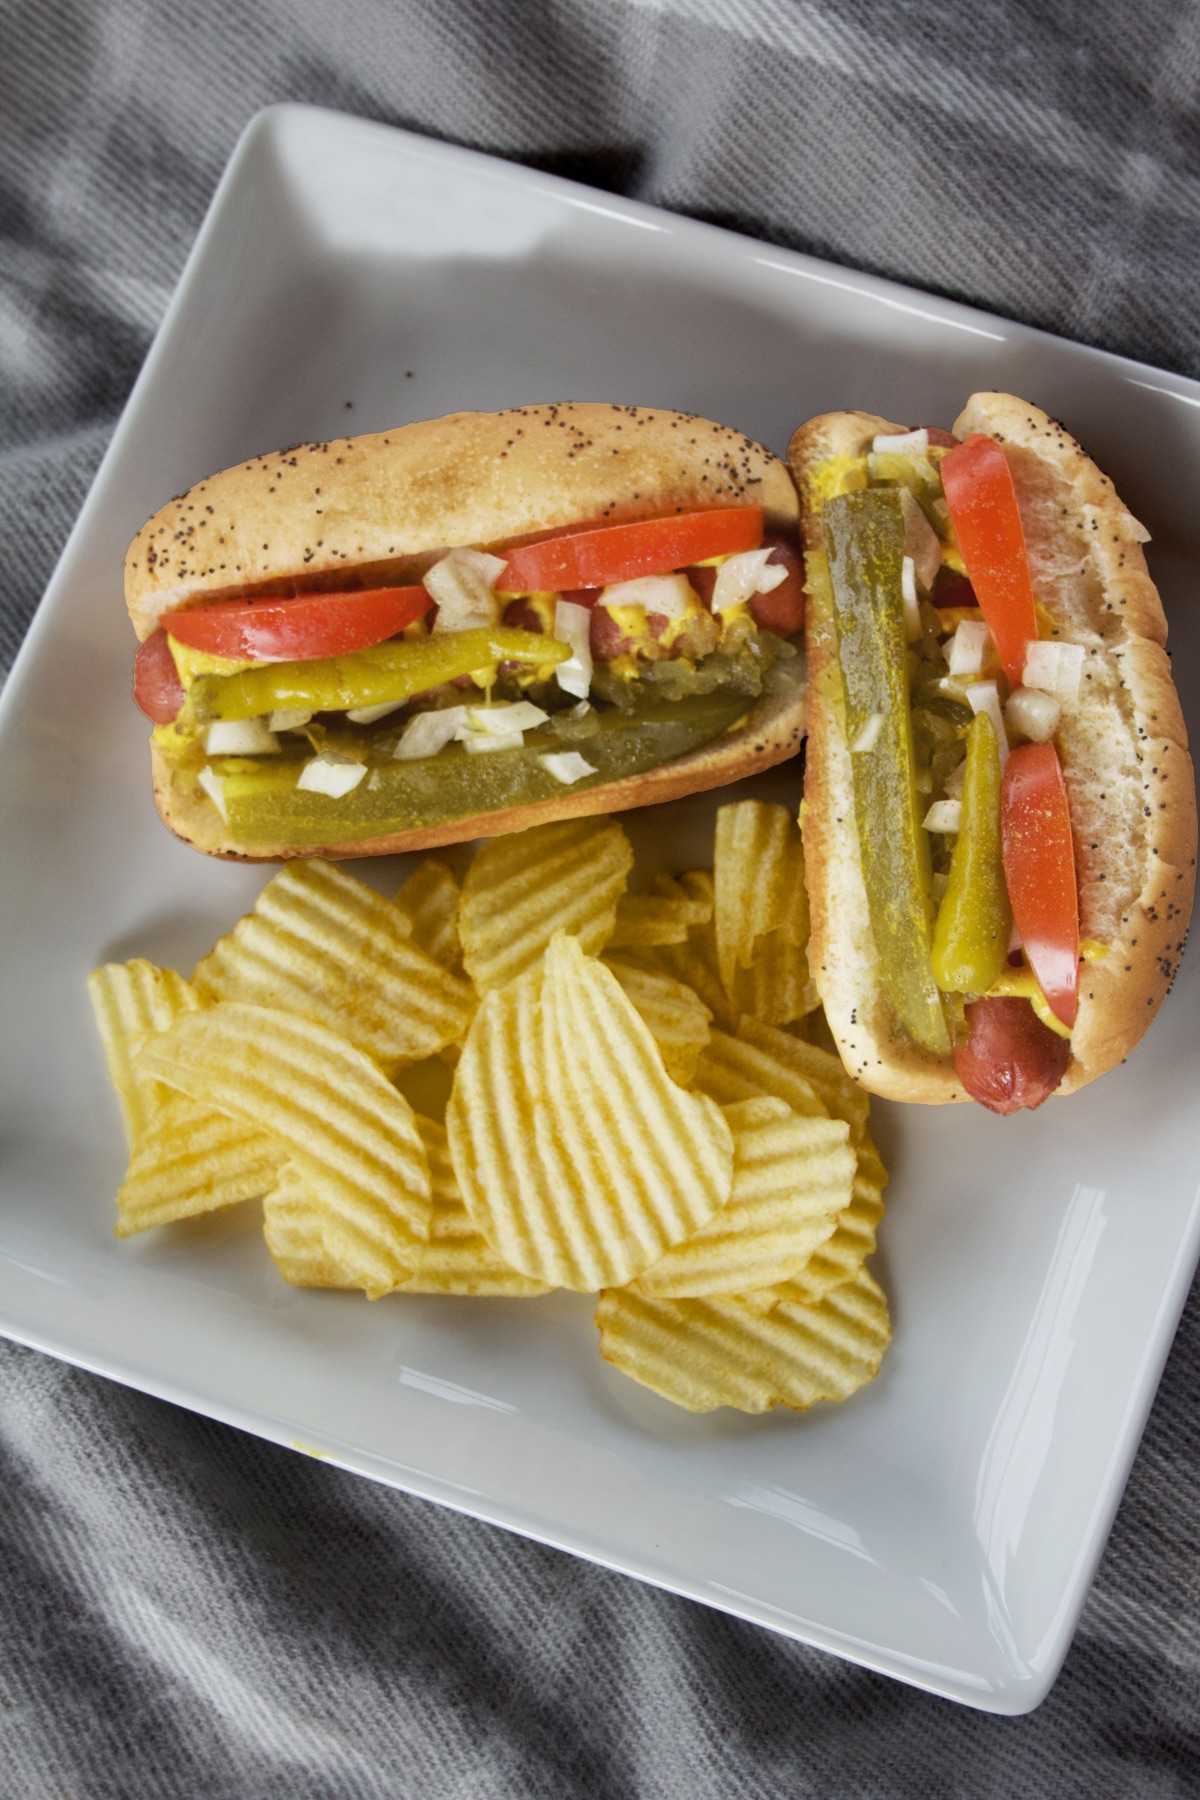 Chicago Dogs on a white plate with a serving of wavy potato chips.